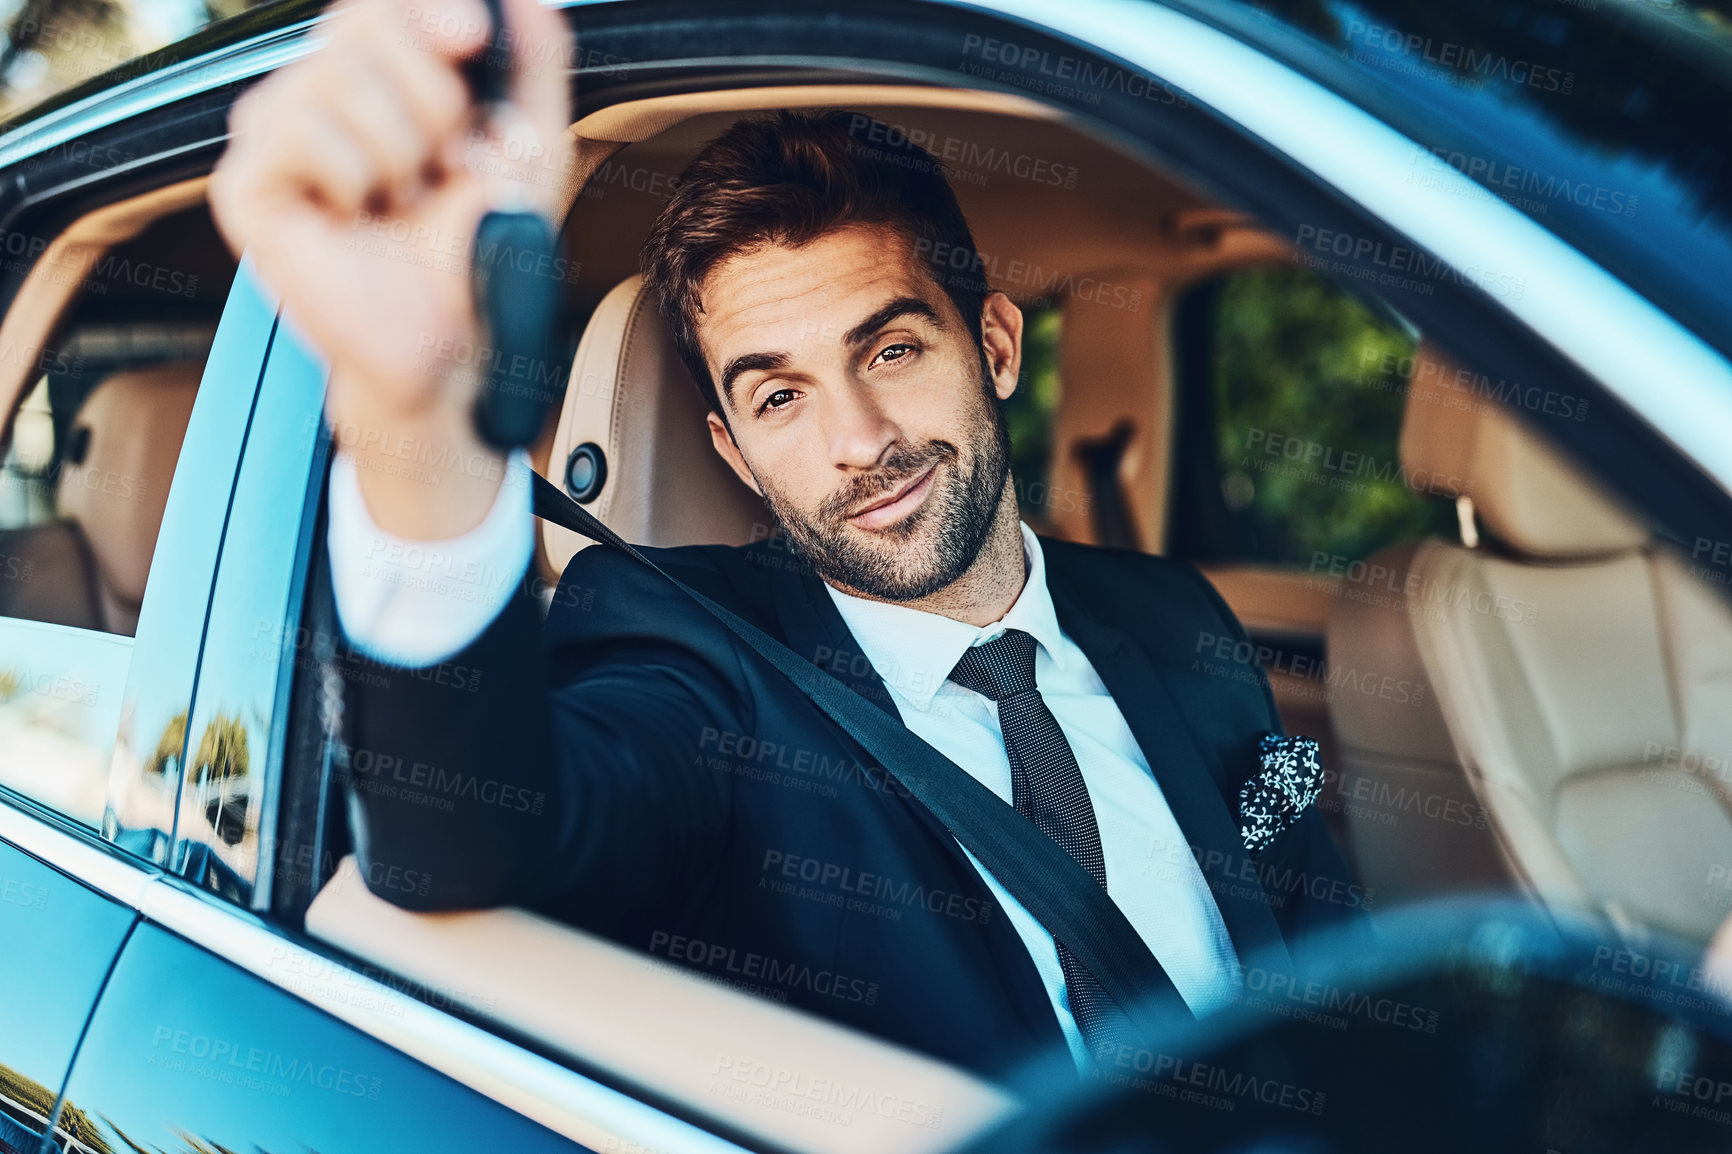 Buy stock photo Cropped shot of a handsome young corporate businessman holding car keys